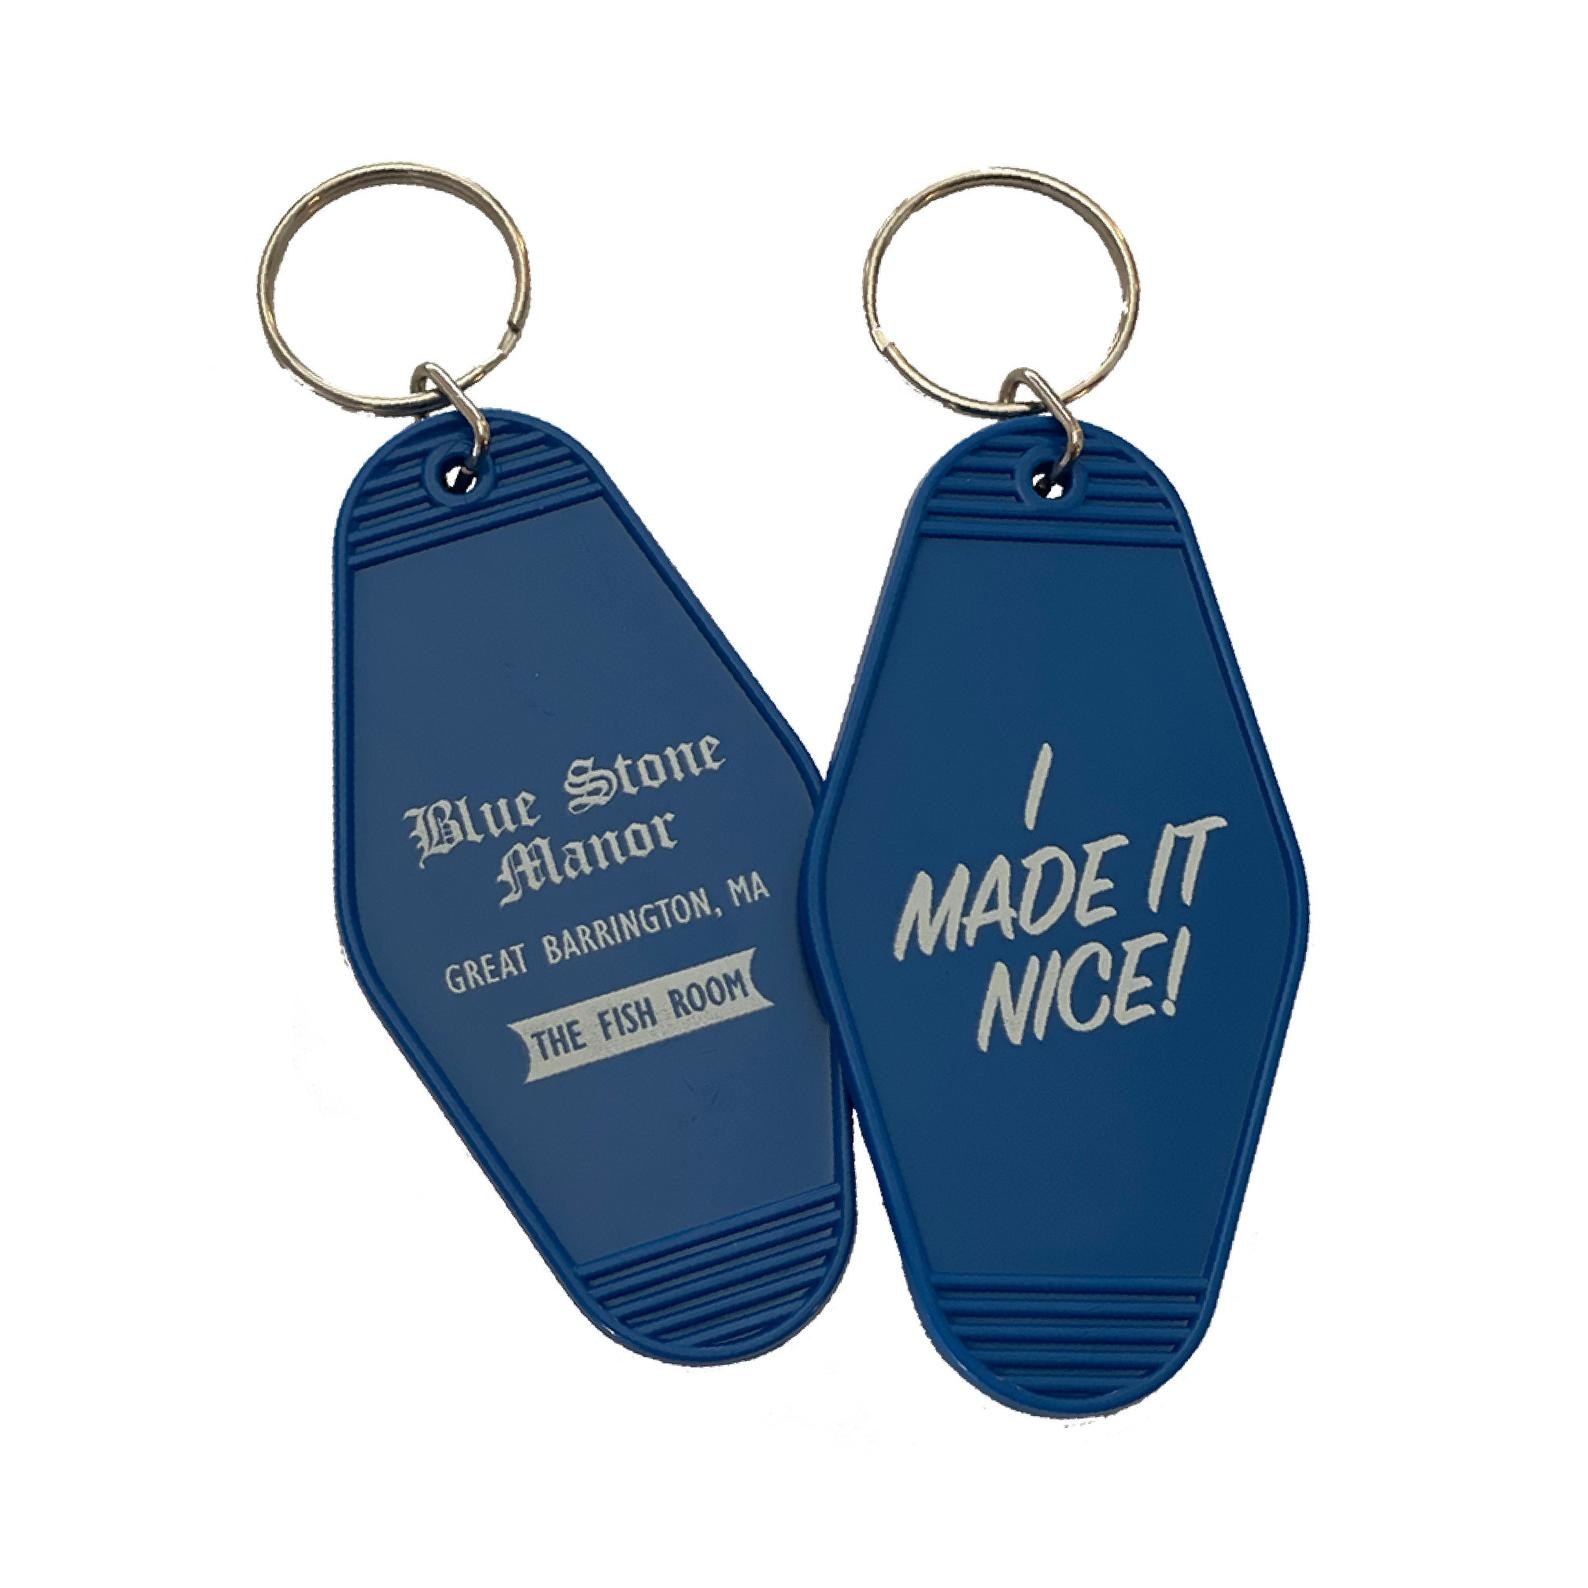 The blue motel-style keychain with text Blue Stone Manor Great Barrington MA on one side and I made it nice on the other